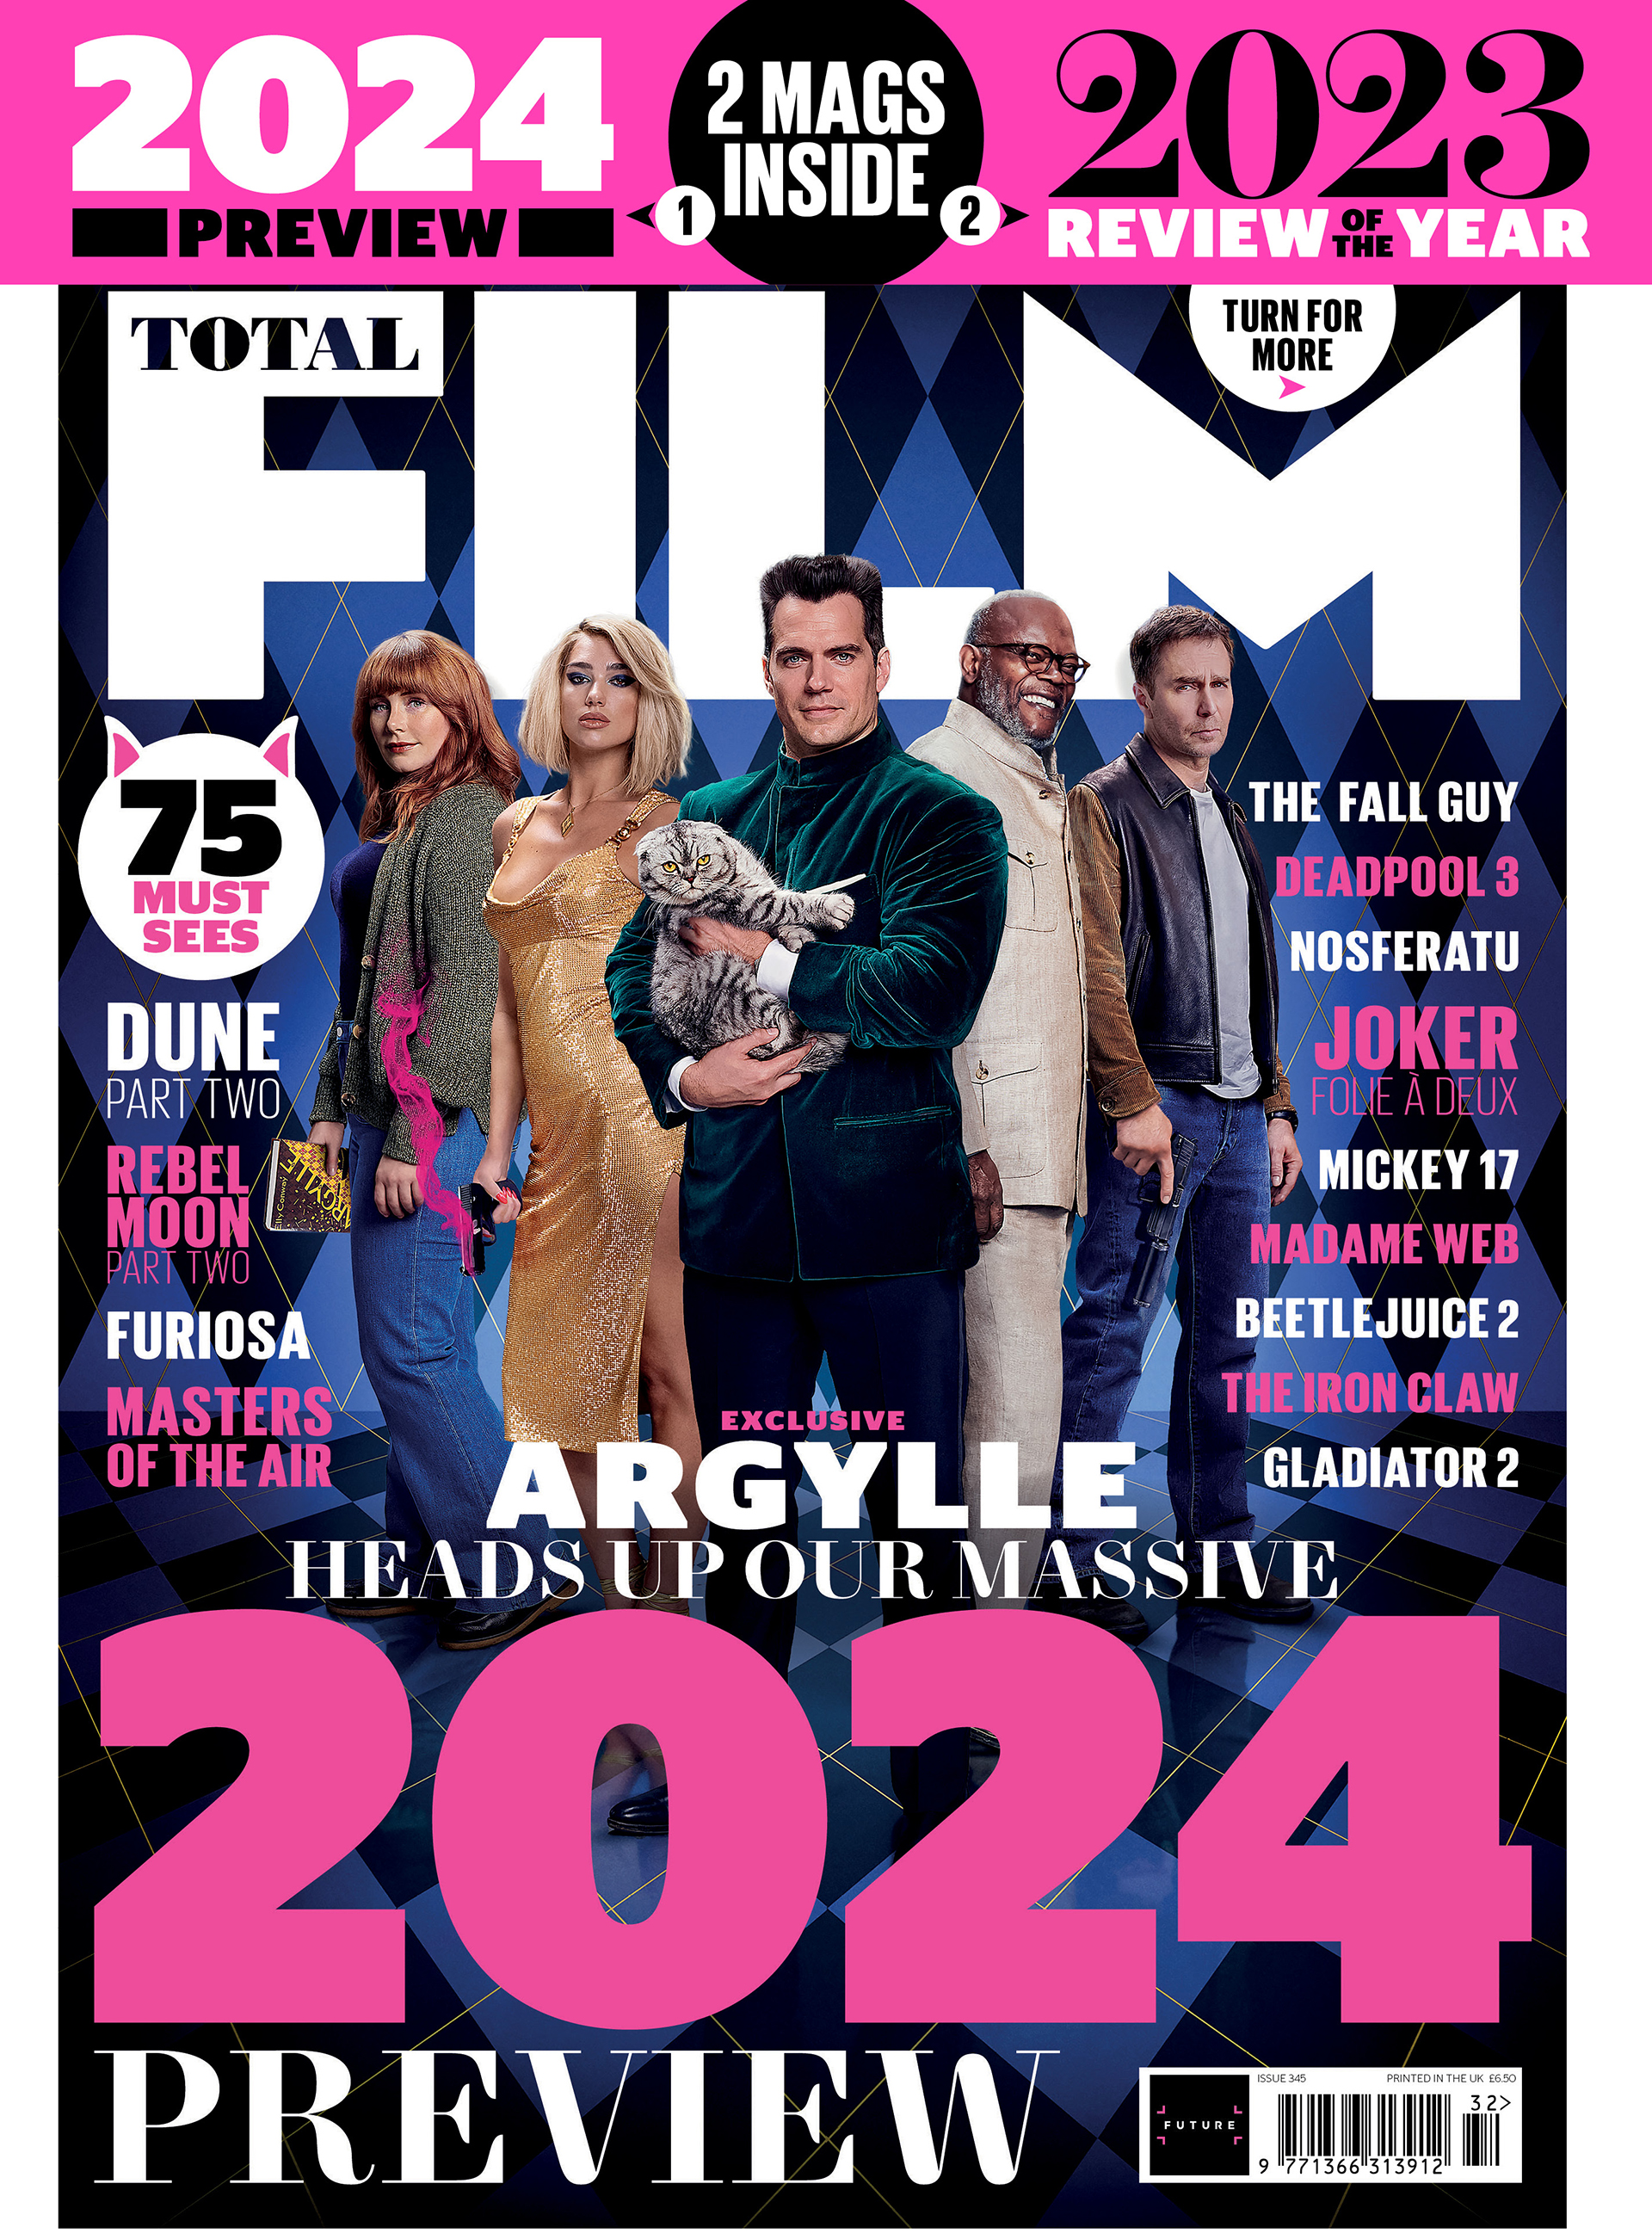 Total Film's 2024 Preview issue